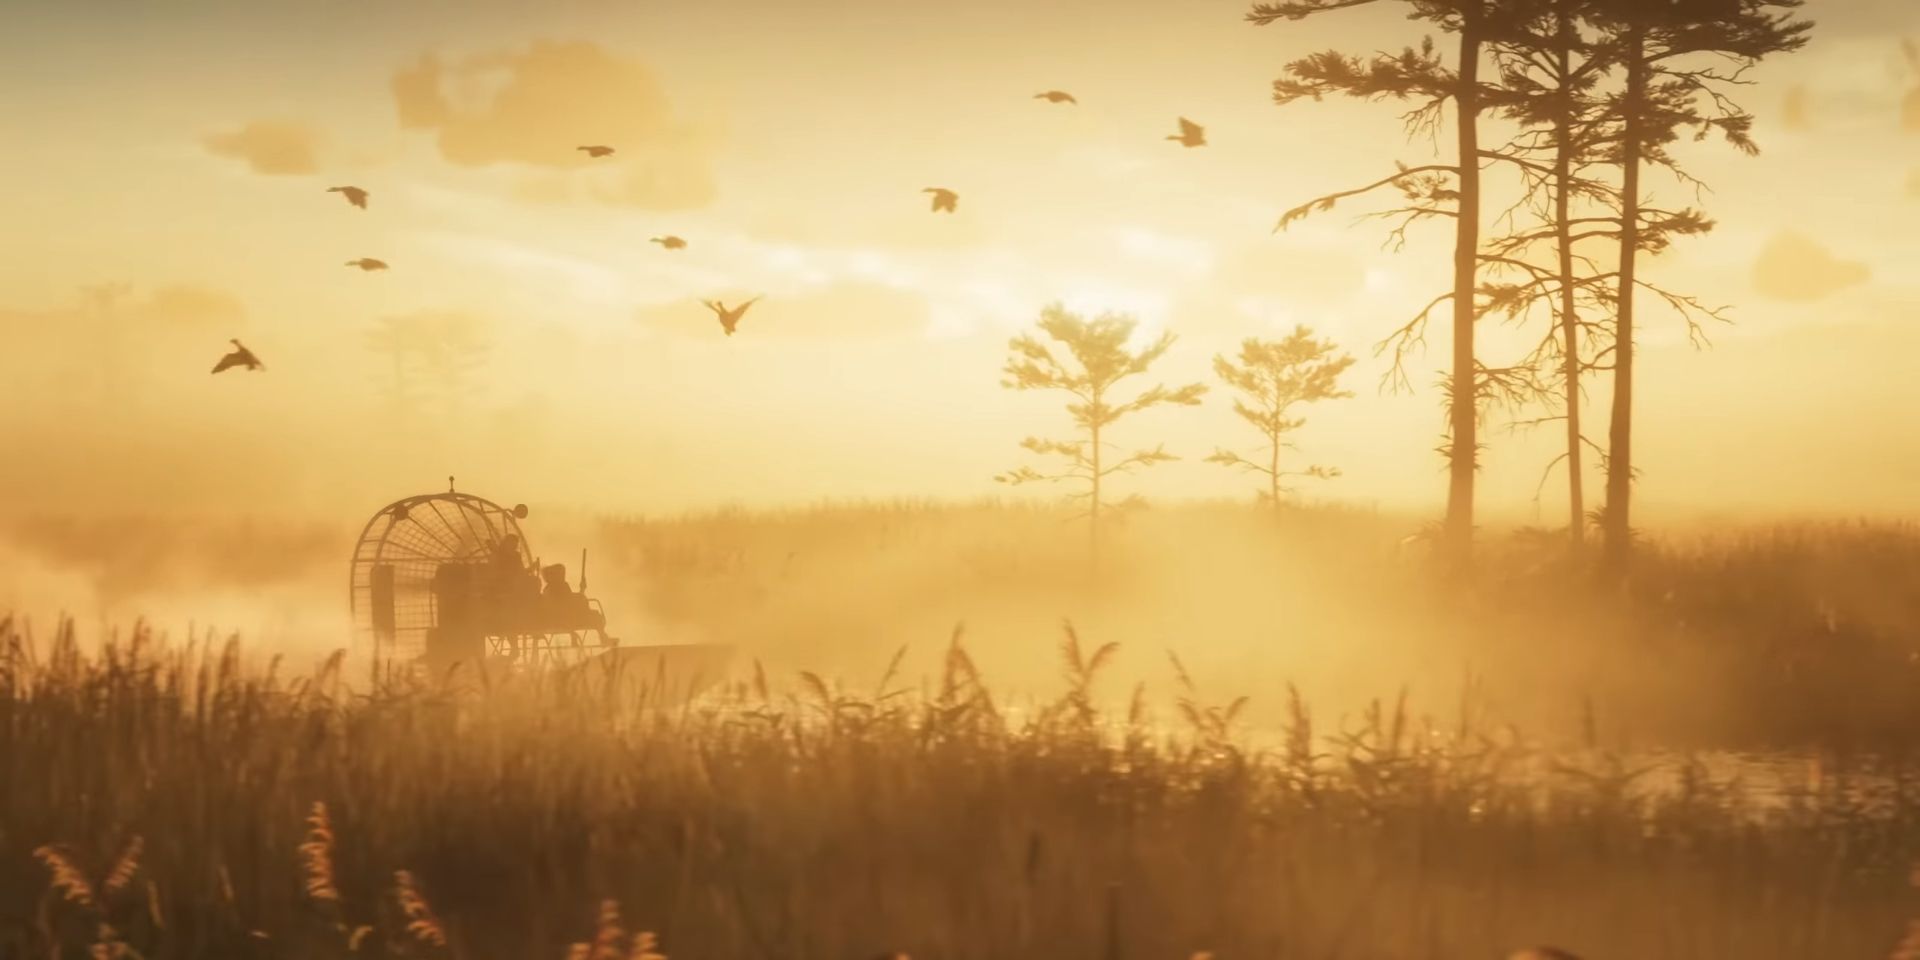 A fanboat speeds through the flooded grassland in a screenshot from the GTA 6 trailer as birds fly overhead.